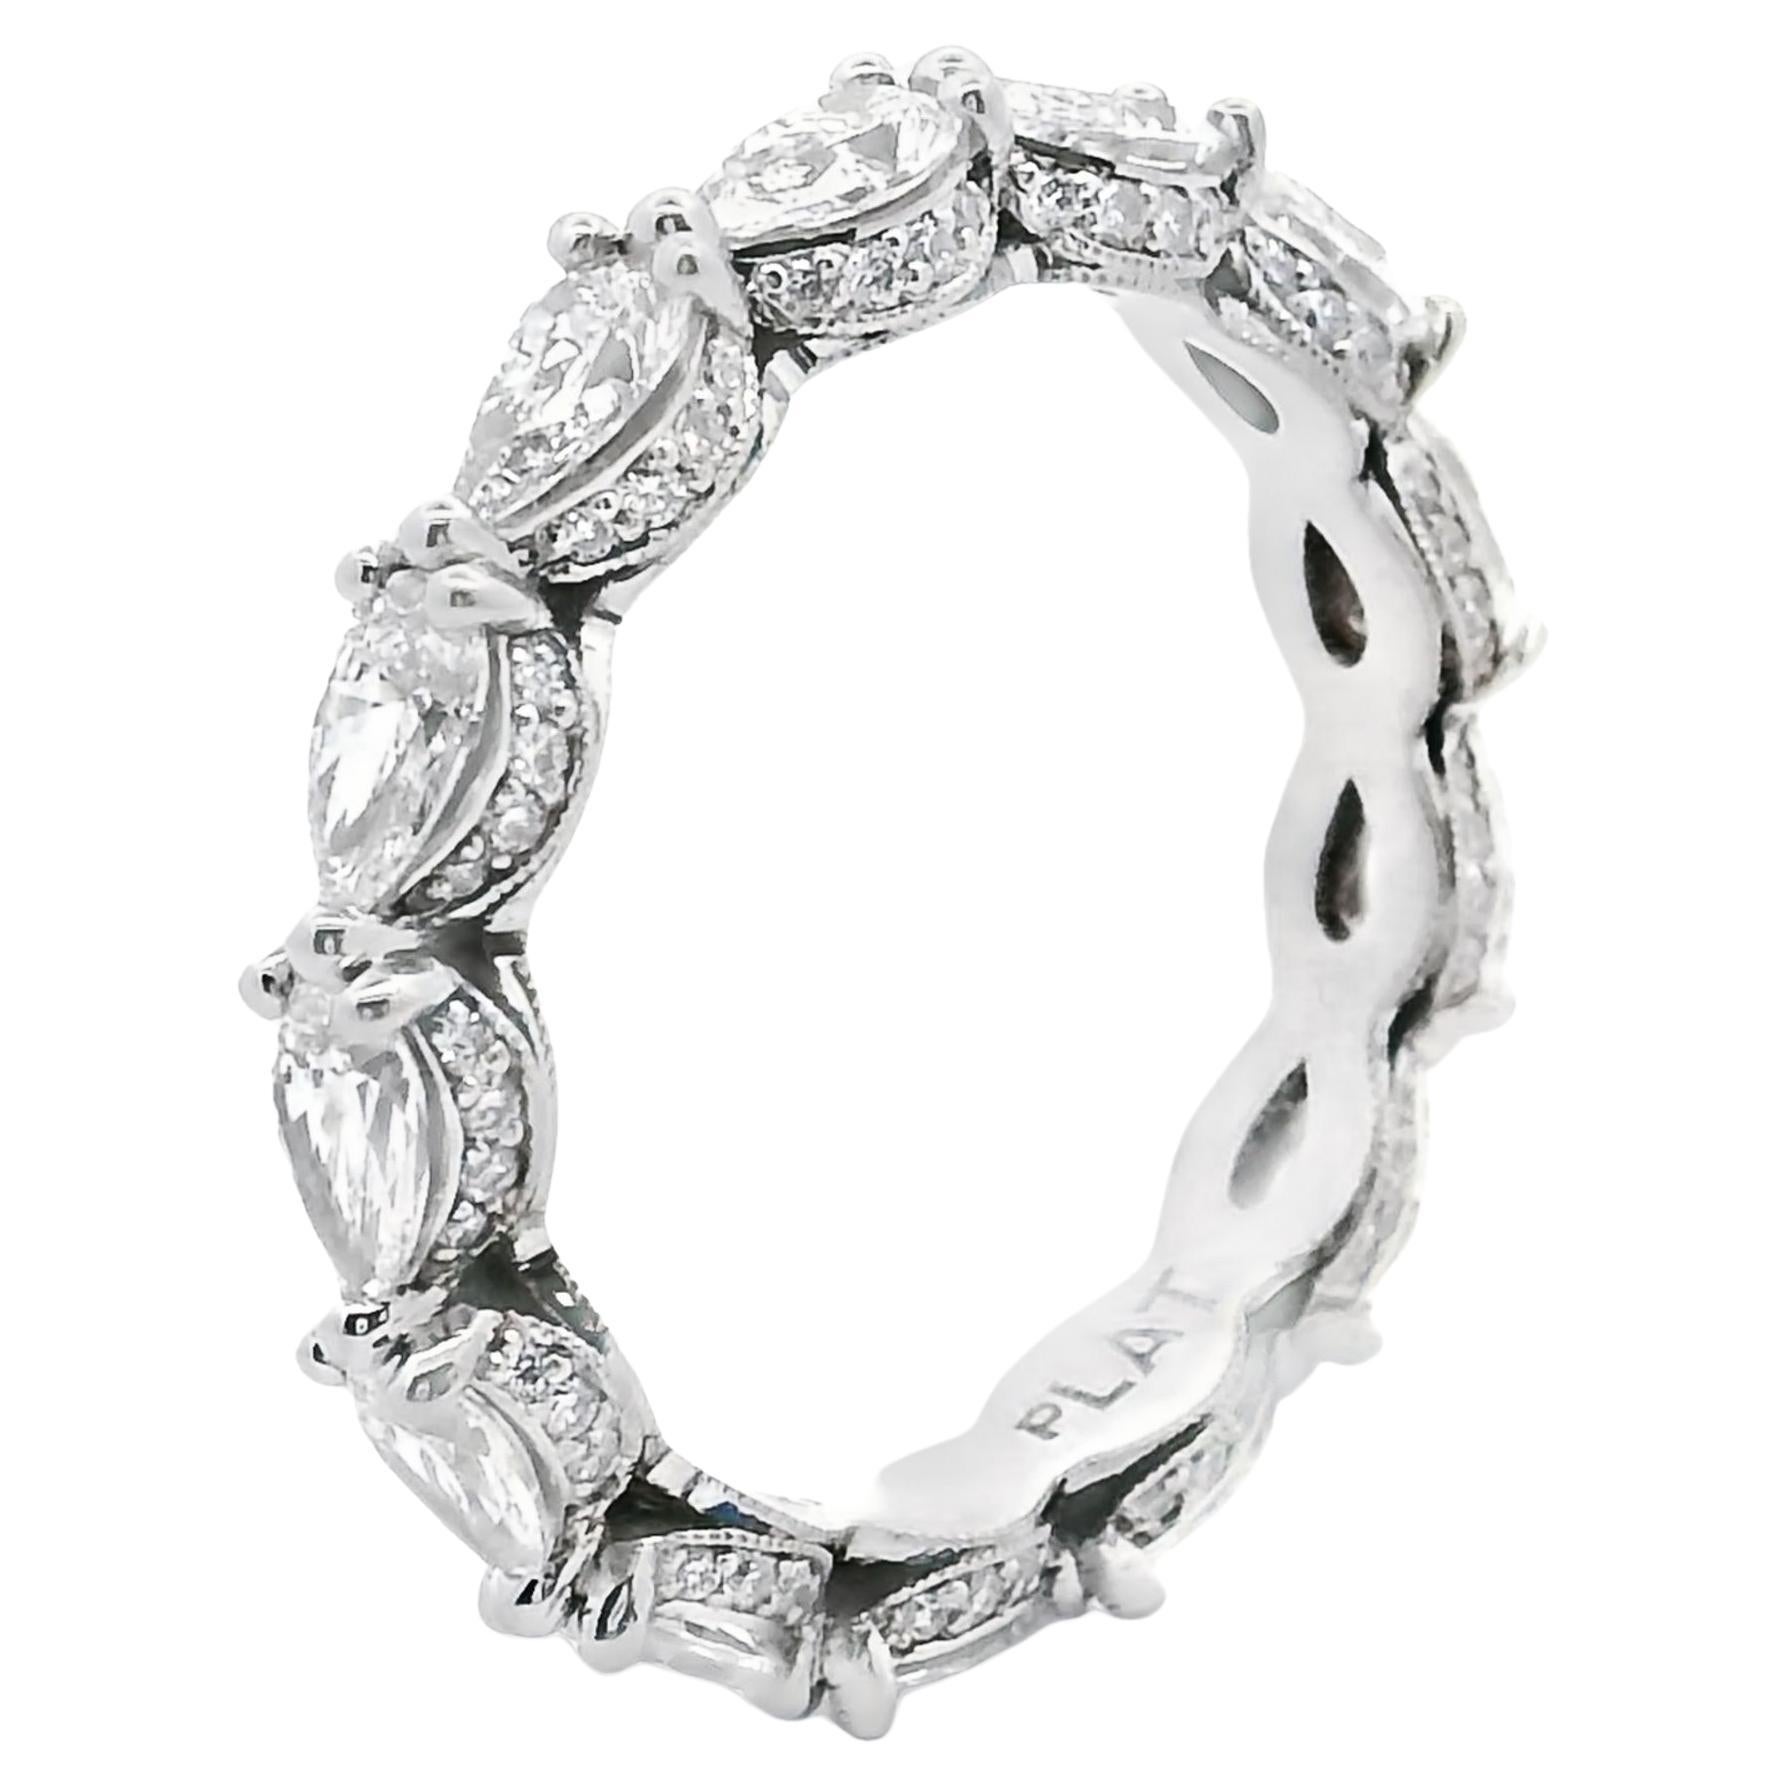 What is a Tacori ring?